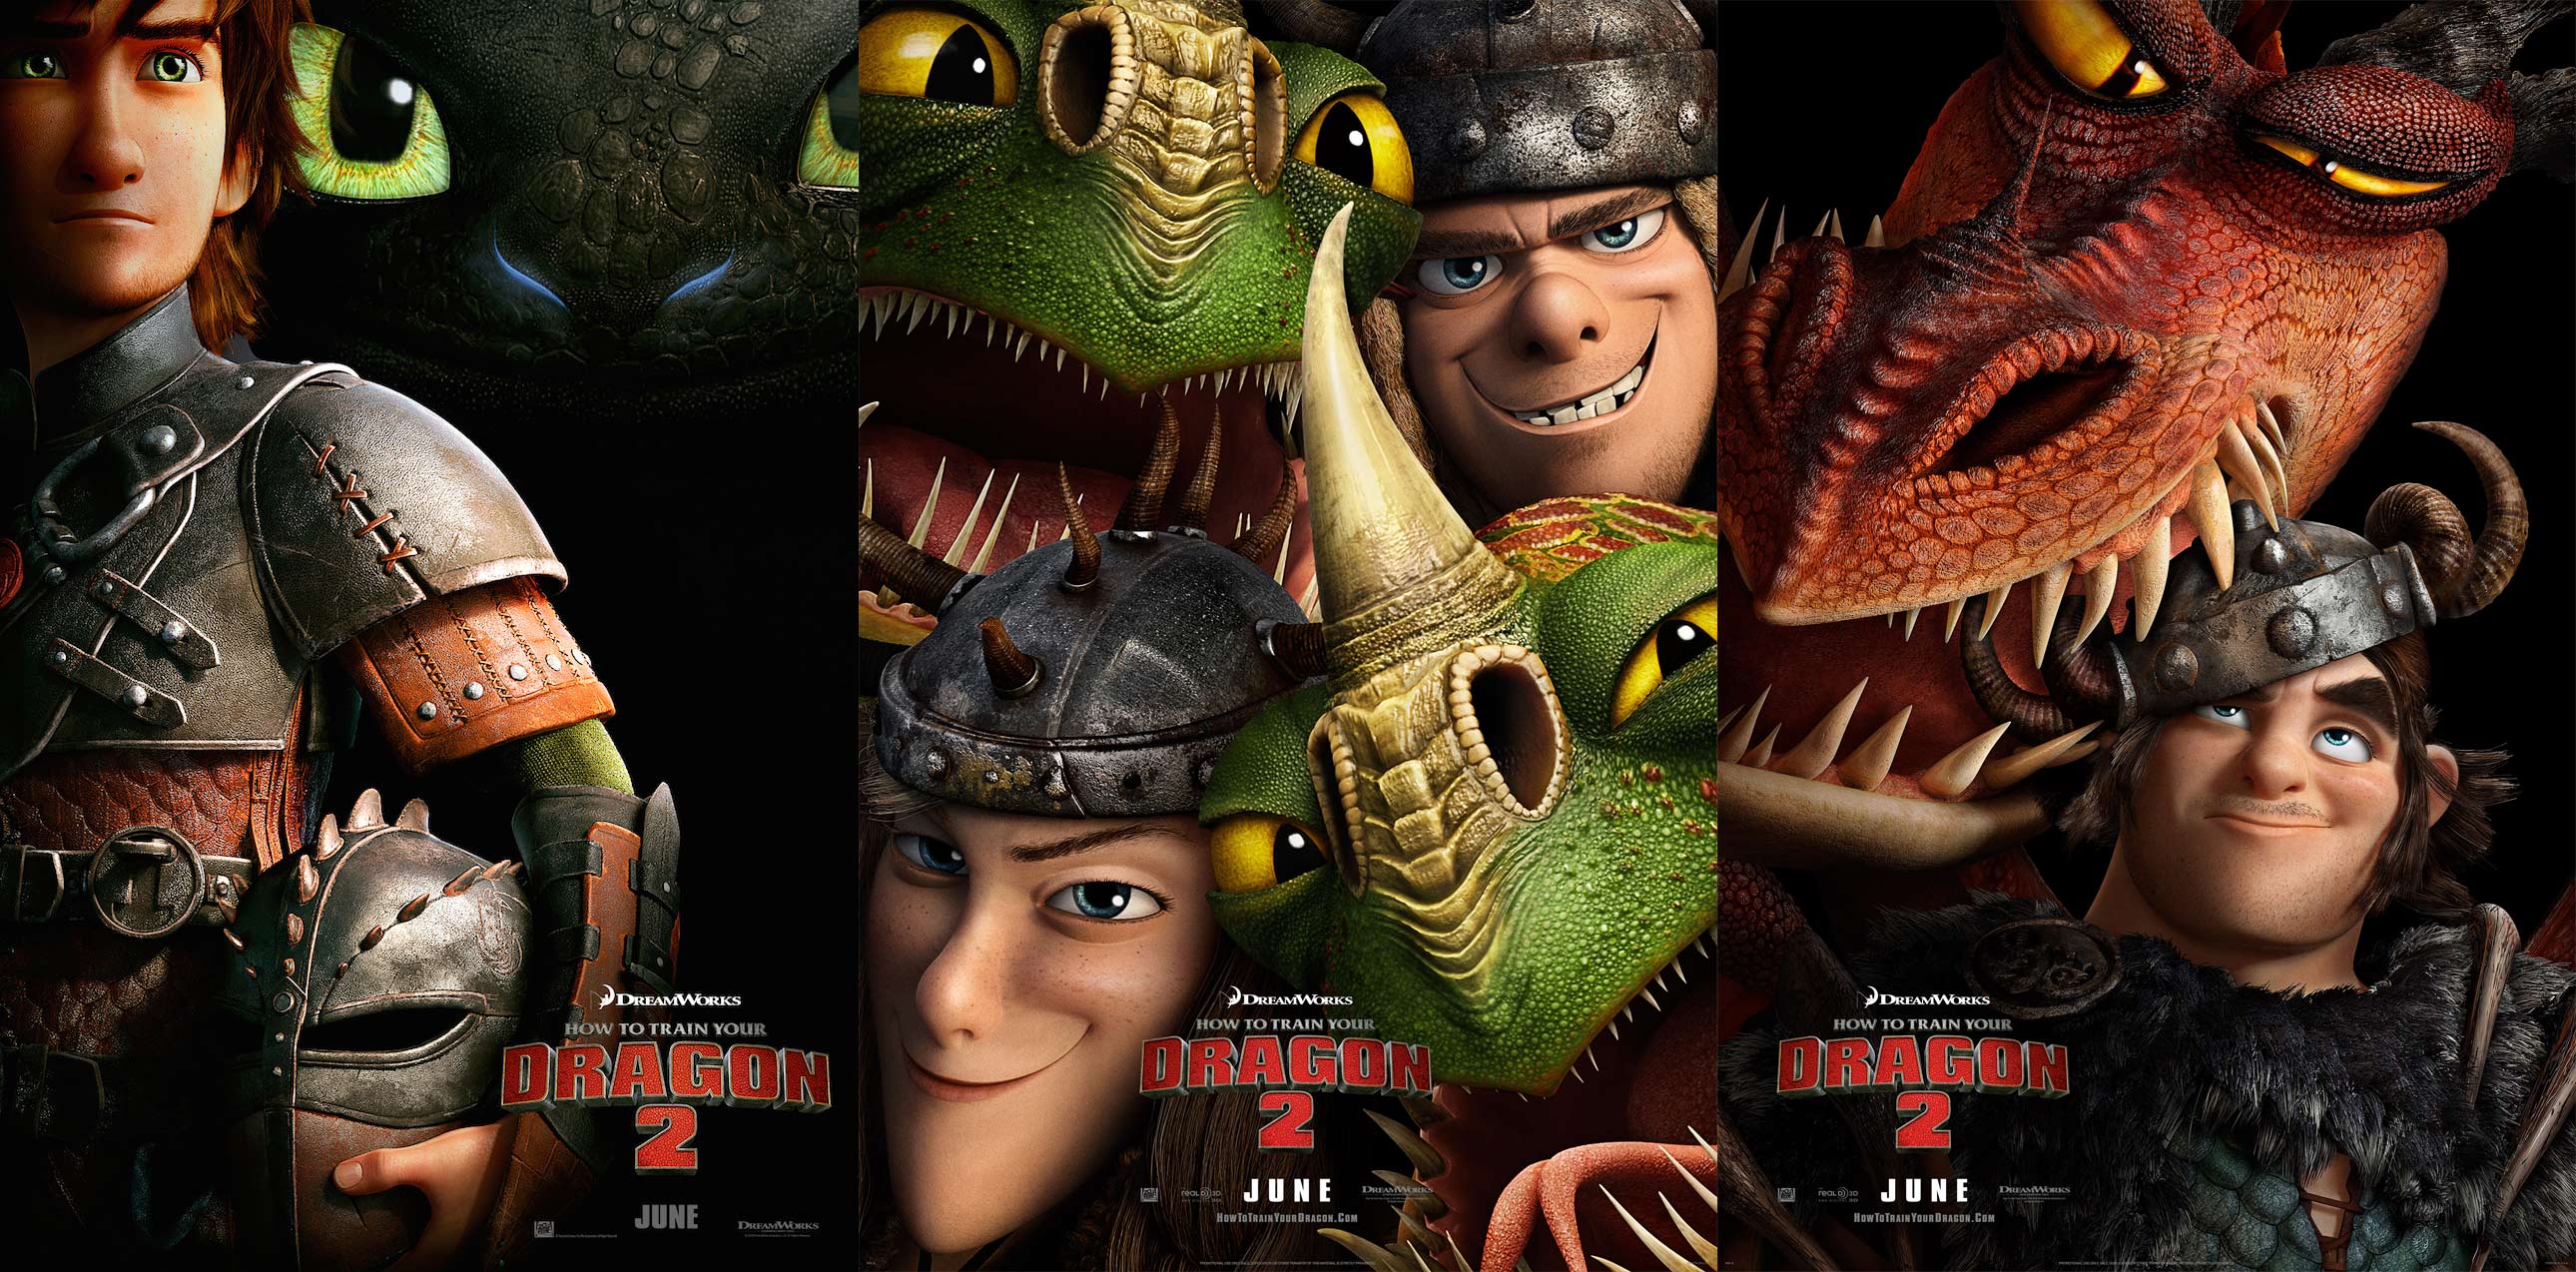 Hiccup, Toothless, Ruffnut, Tuffnut, Barf, Belch, Snotlout and Hookfang wal...